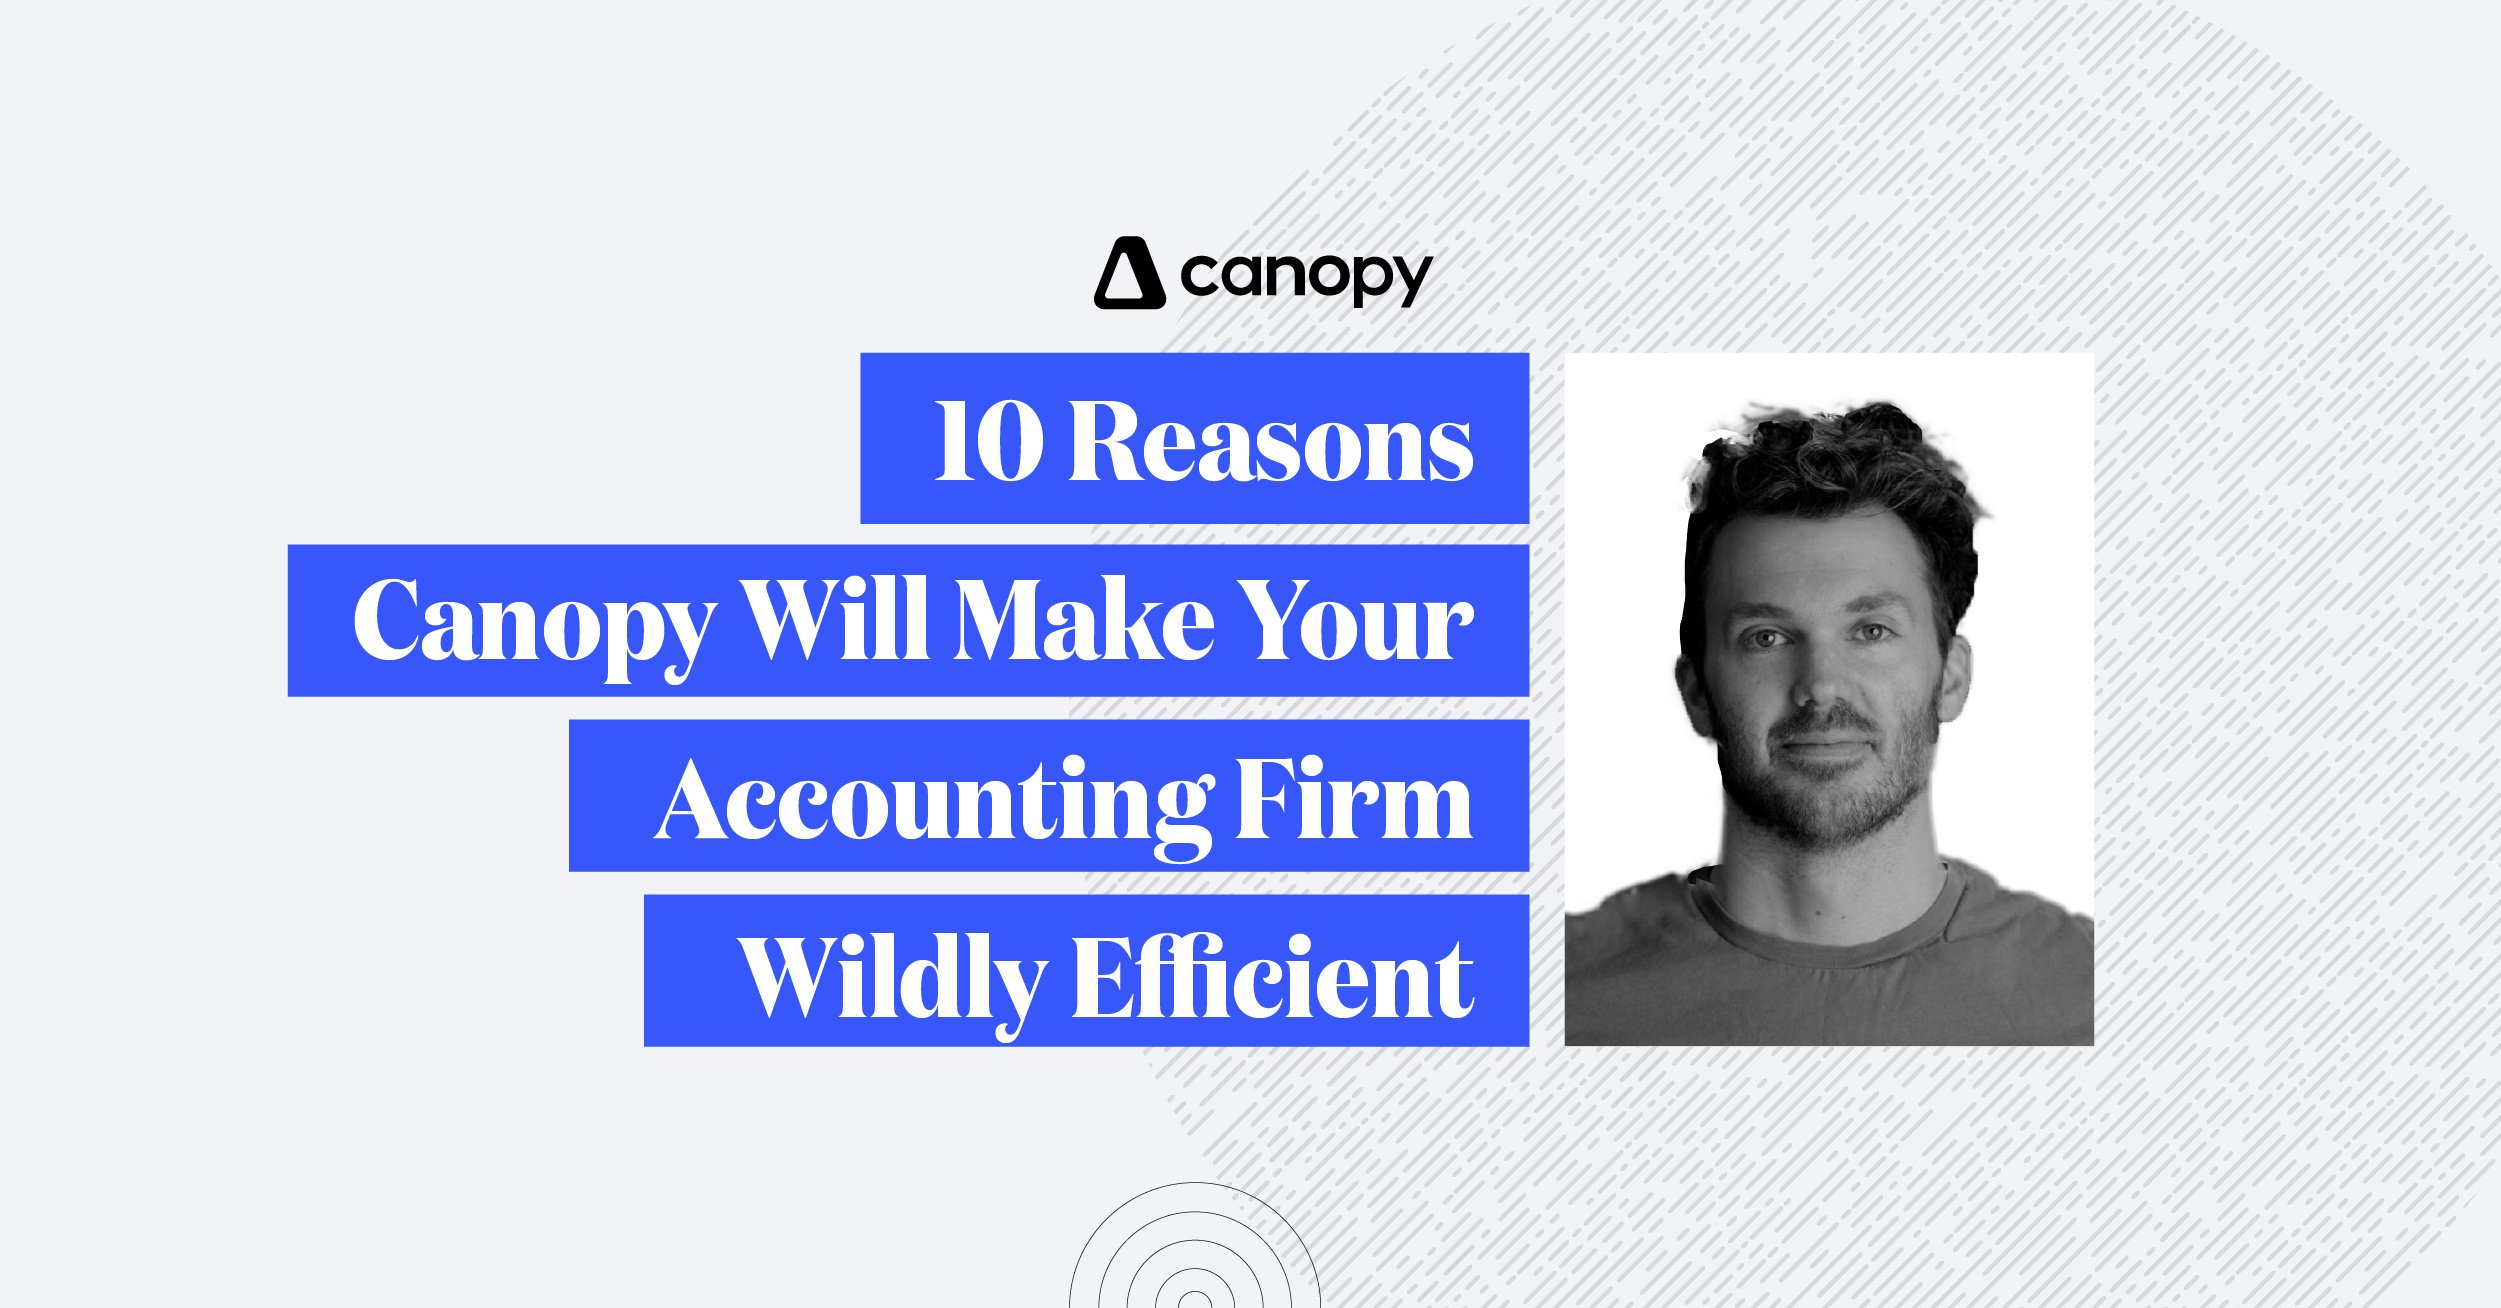 10 Reasons Canopy Will Make Your Accounting Firm Wildly Efficient